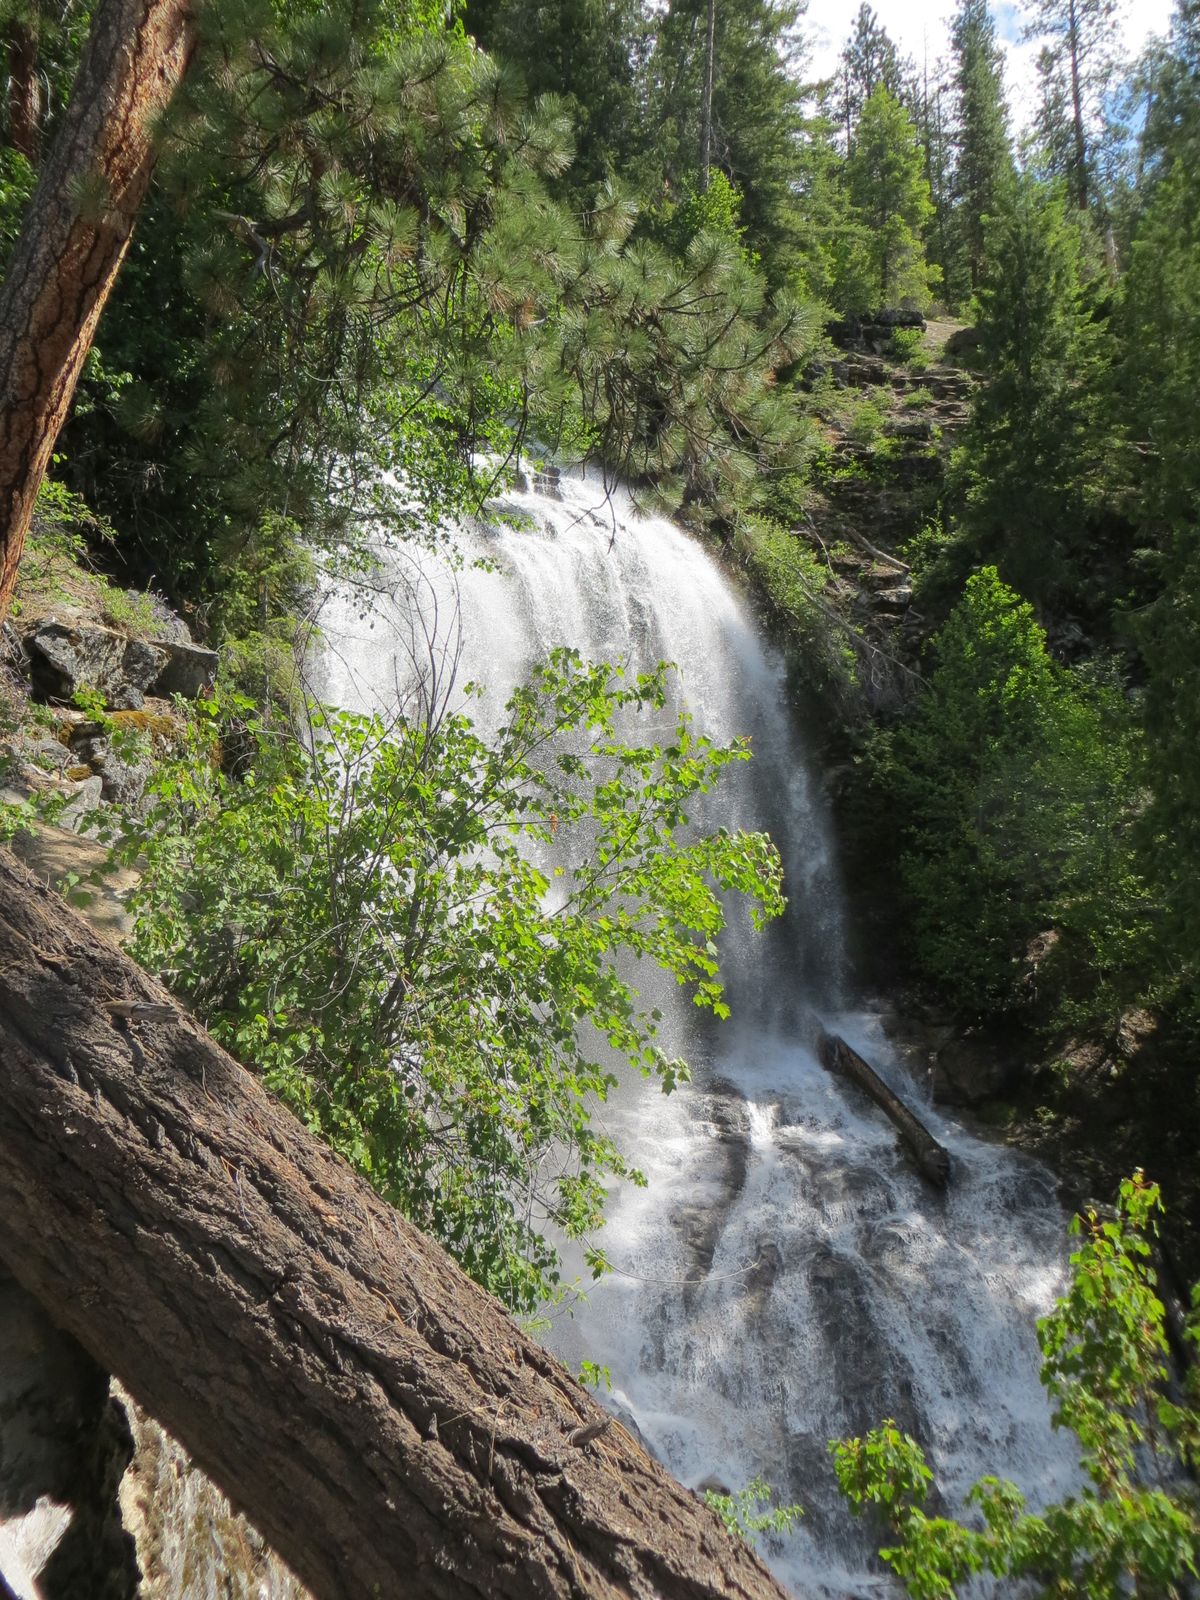 Silver Falls on the Entiat Ranger District of the Okanogan-Wenatchee National Forest. (Patrick Herman / U.S. Forest Service)